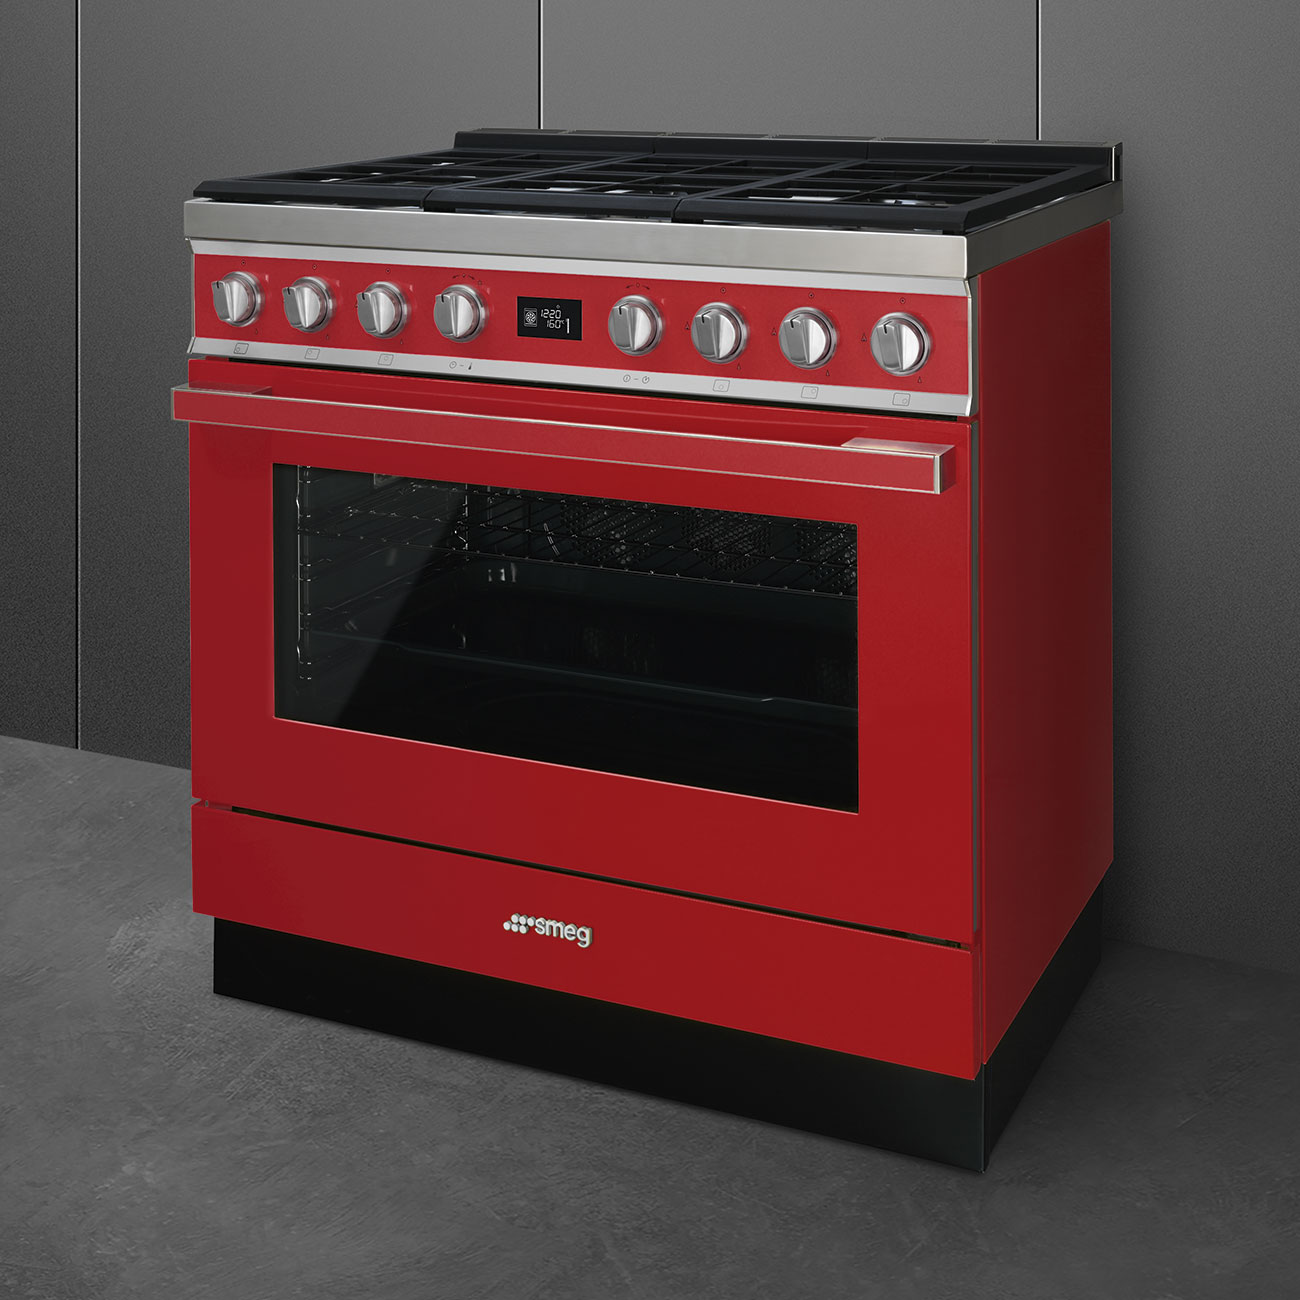 Smeg Red Cooker with Gas Hob_2